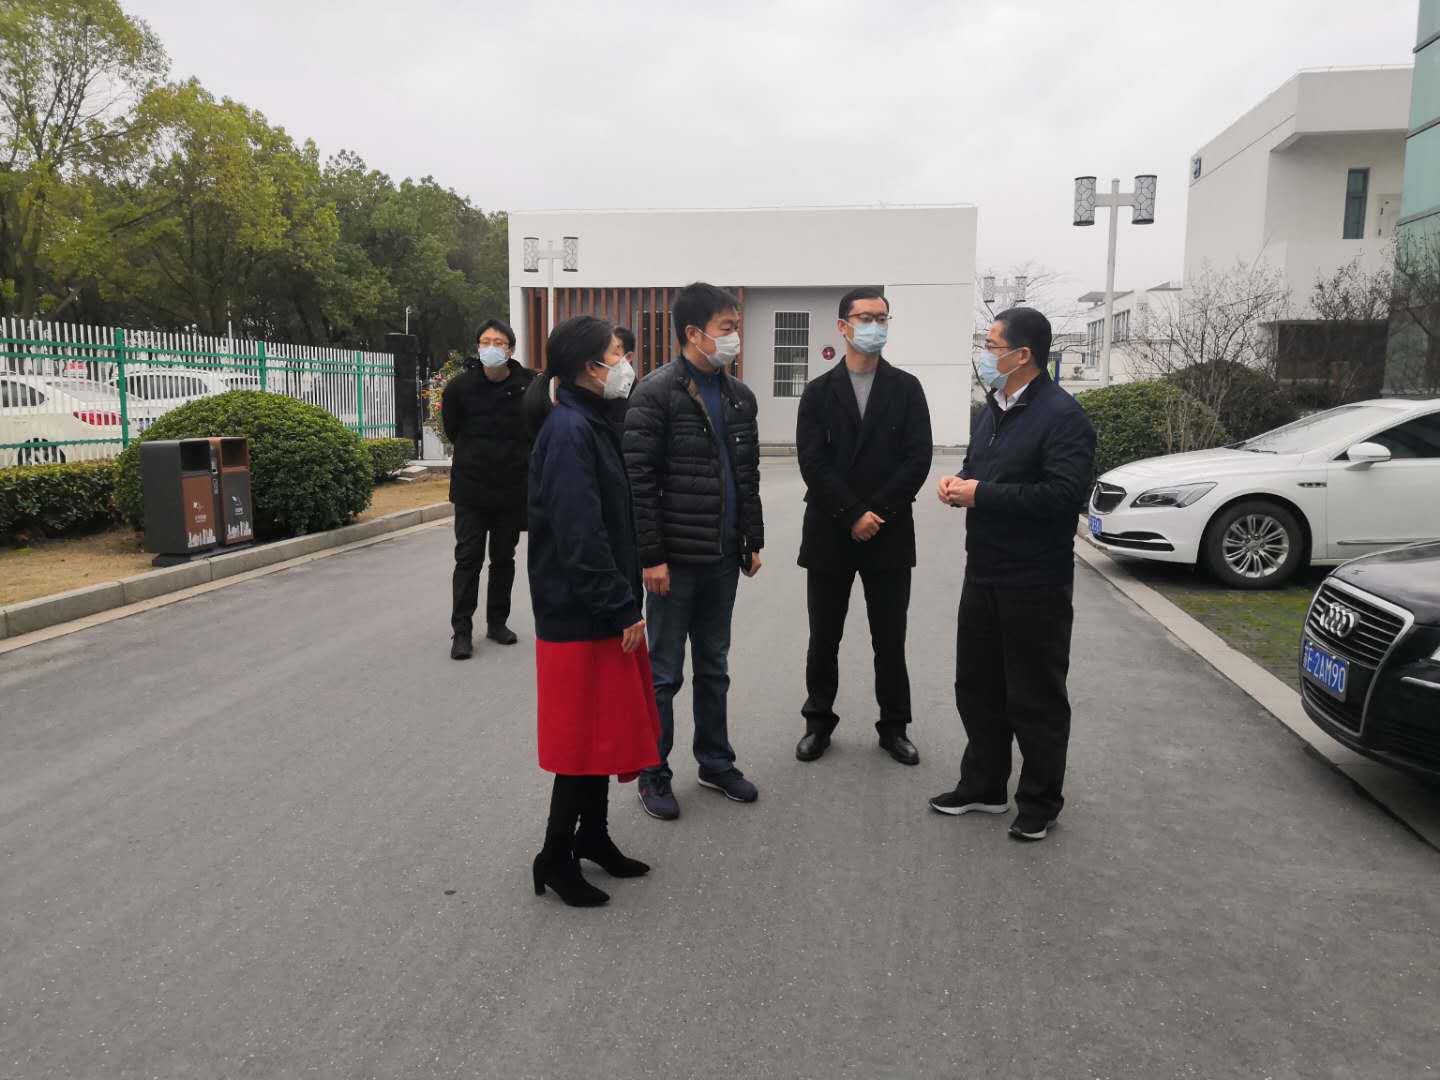 Chief Executive Yongqing Zhang came to our company for investigation and guidance